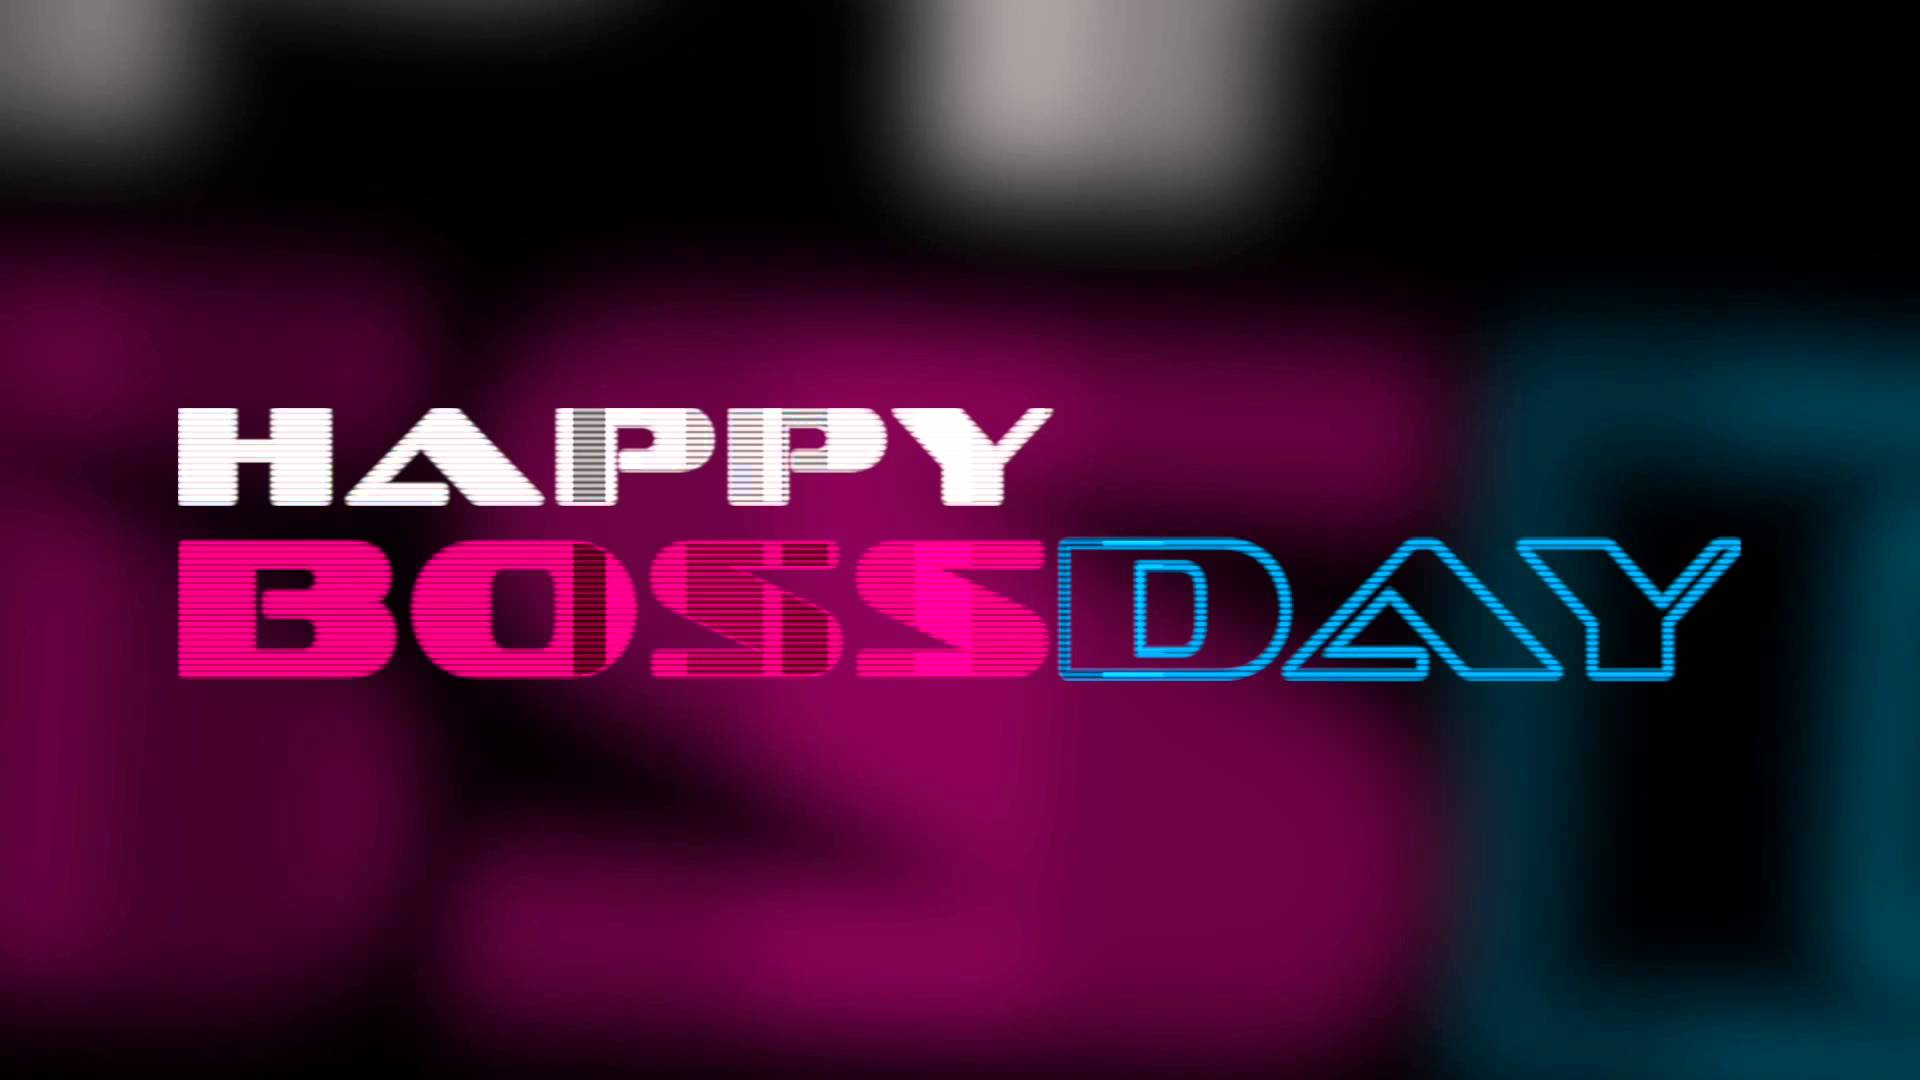 Happy Boss Day HD Wallpaper, Image, Cover, Picture & Banners